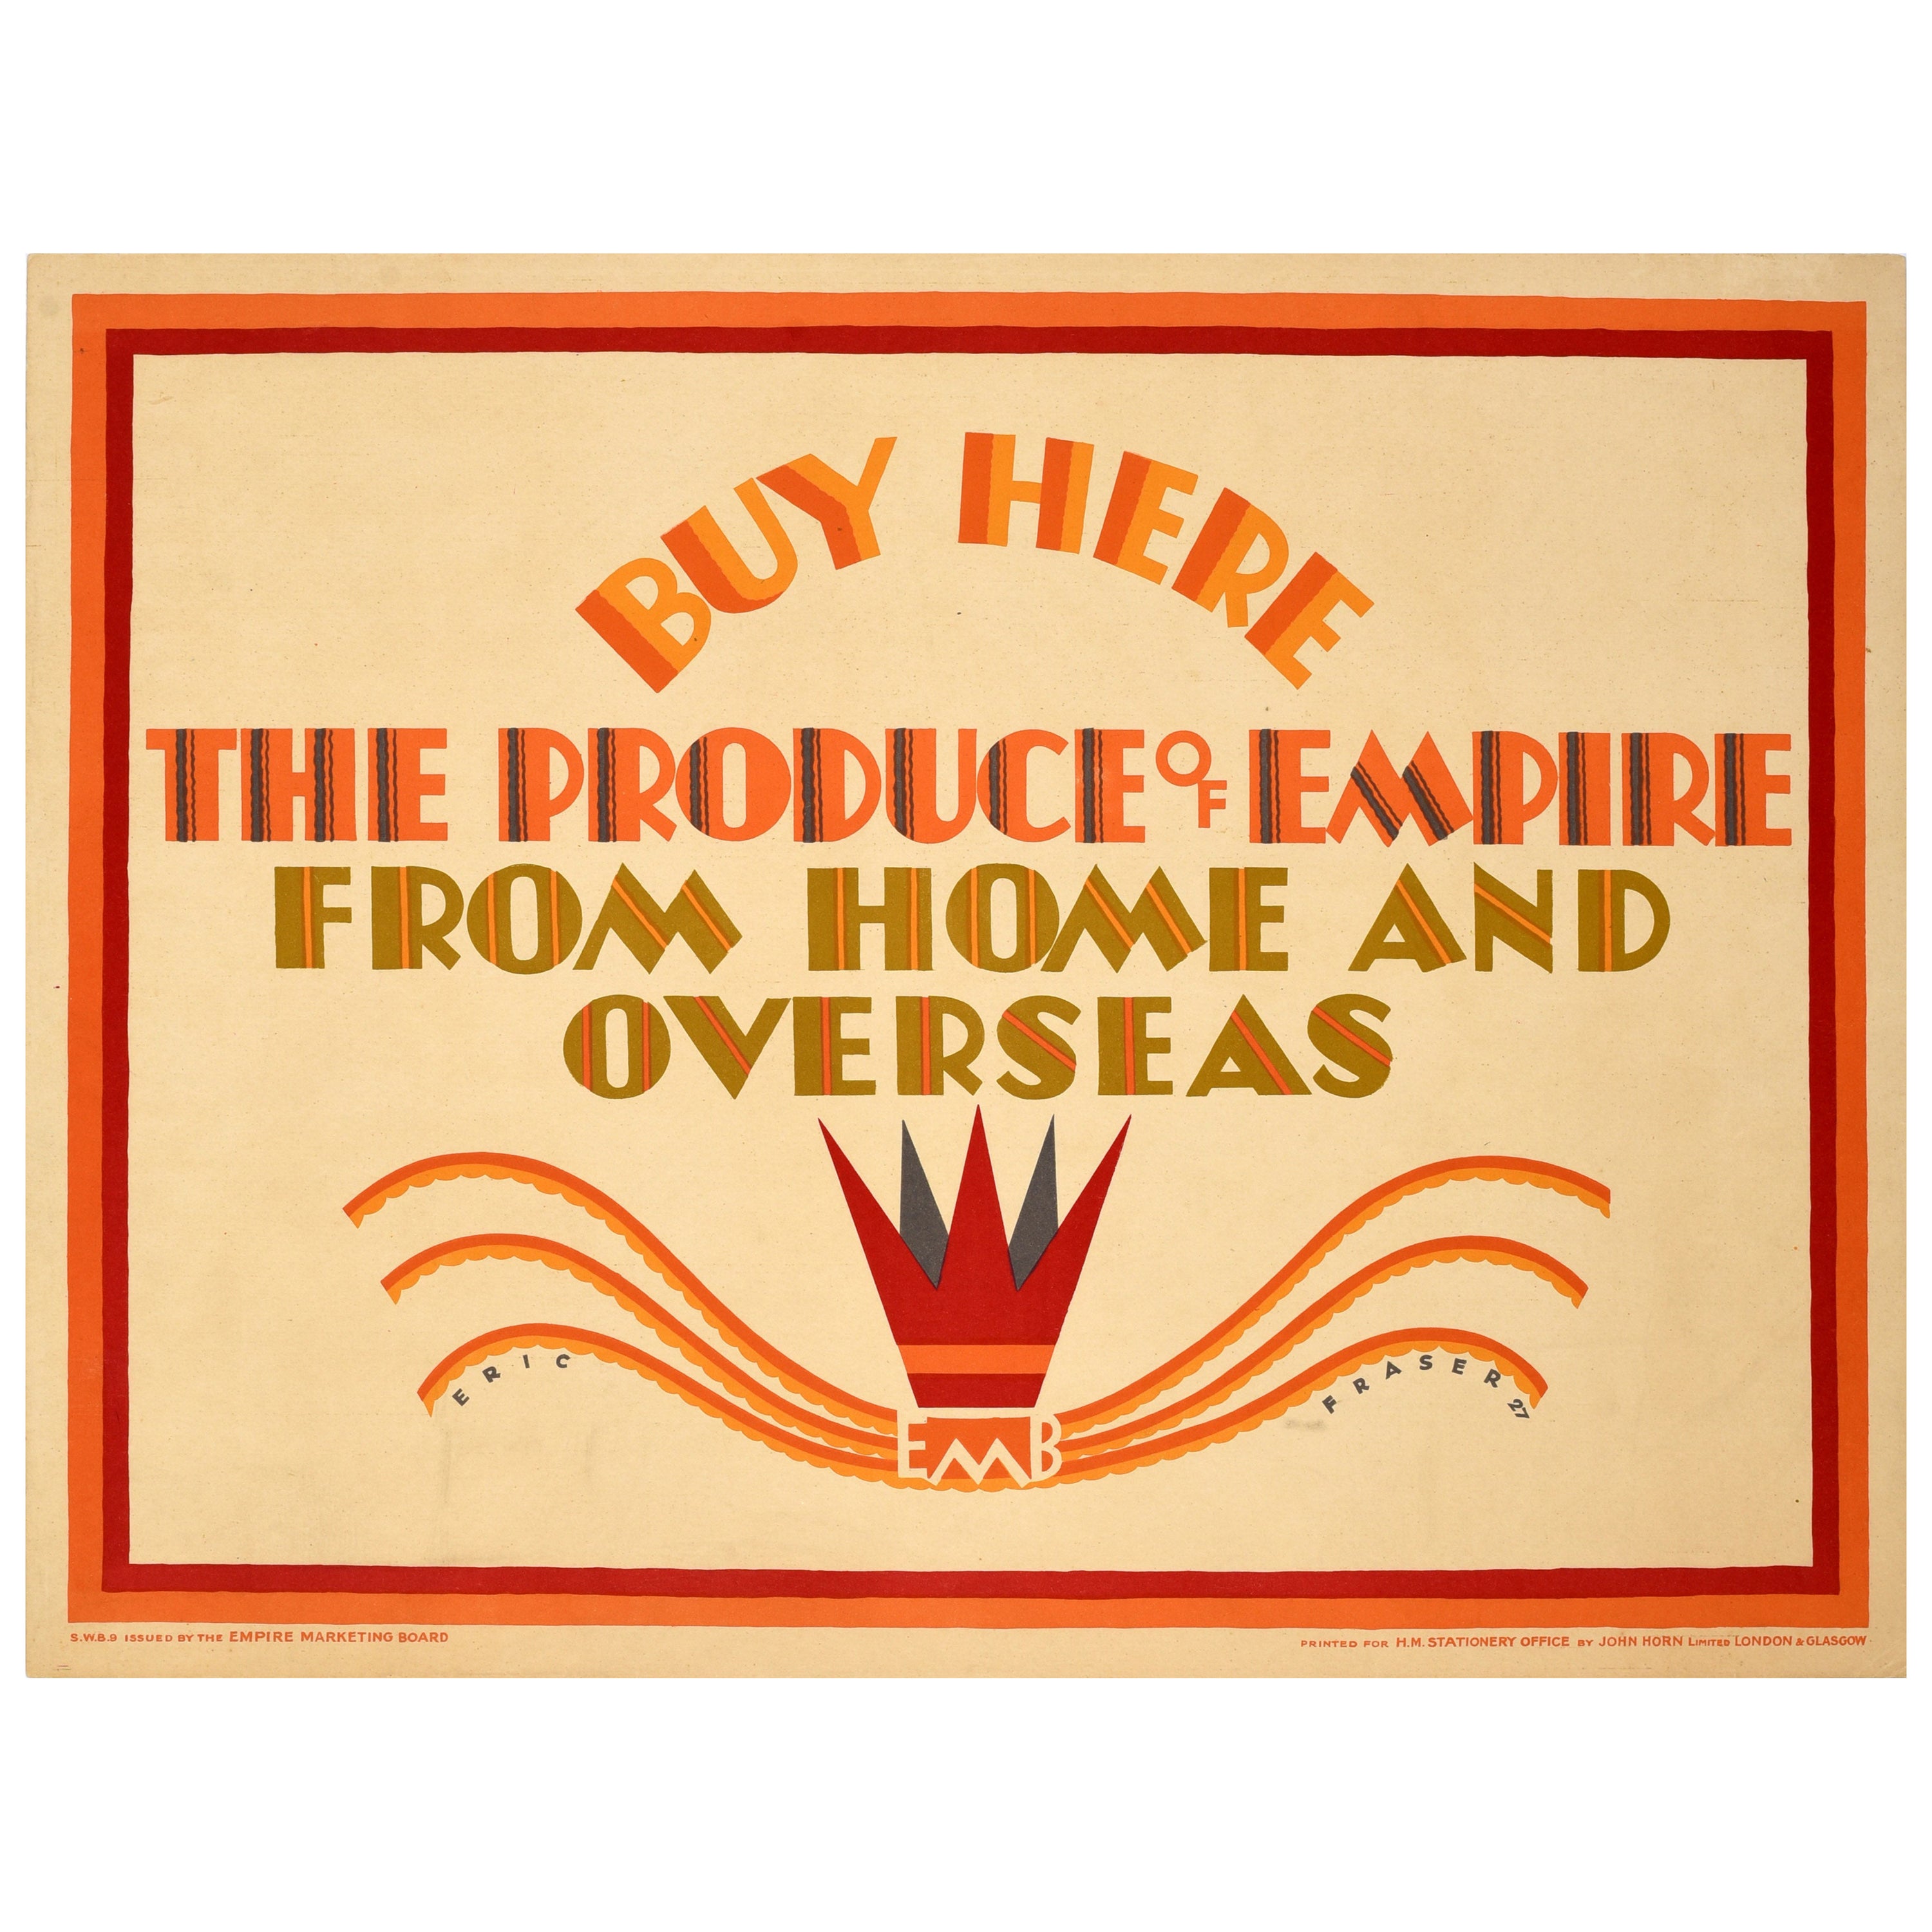 Original Vintage Advertising Poster Buy Here Produce Of Empire Marketing Board For Sale